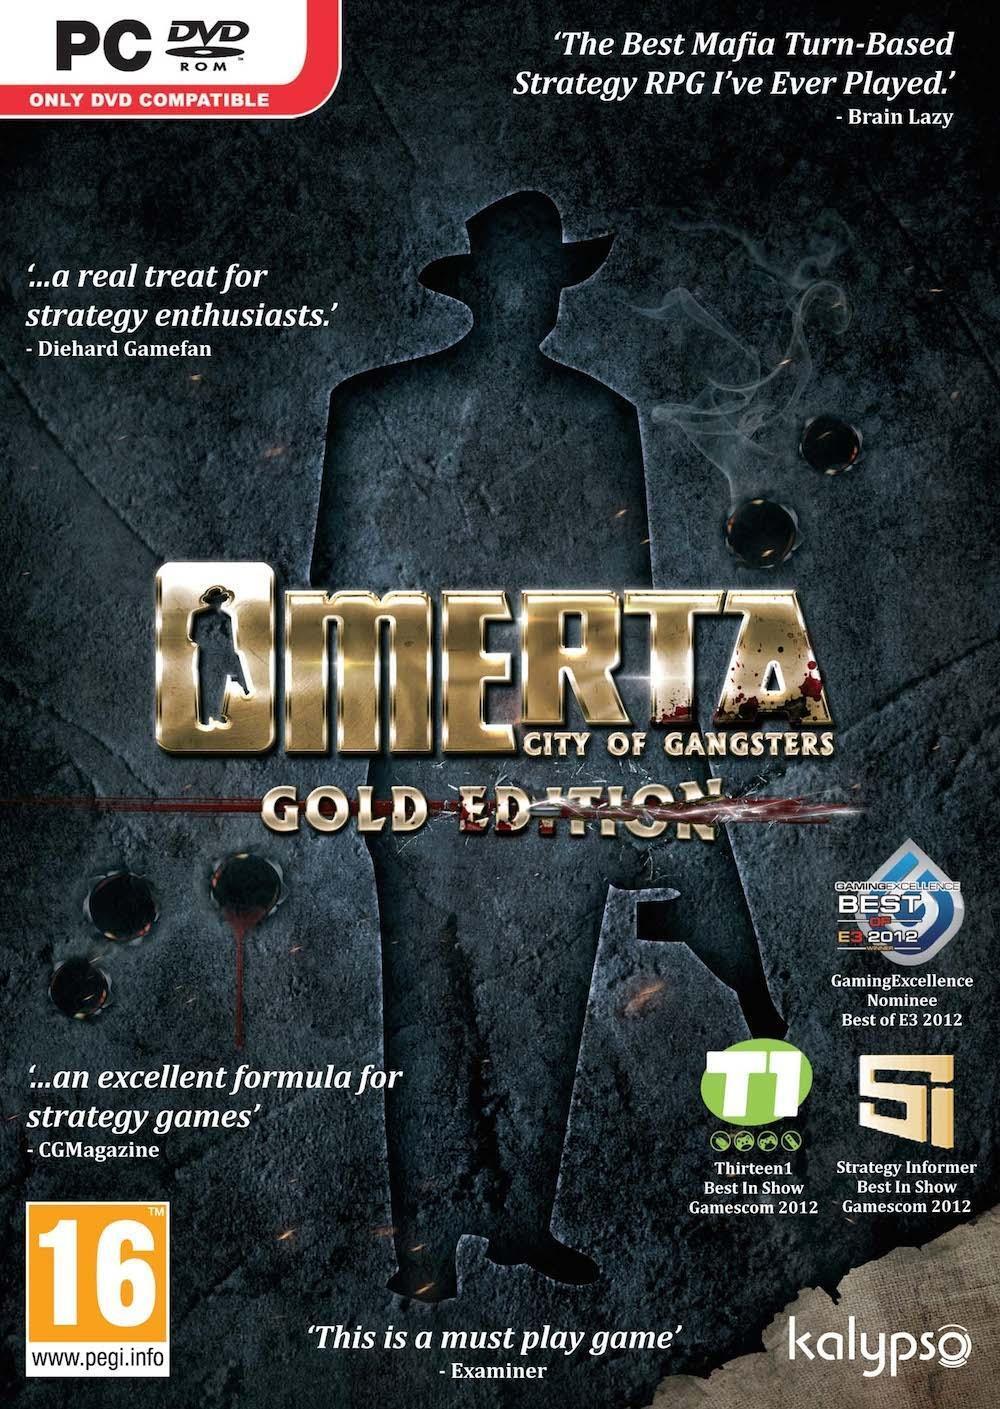 Kalypso Omerta - City Of Gangsters (Gold Edition PC